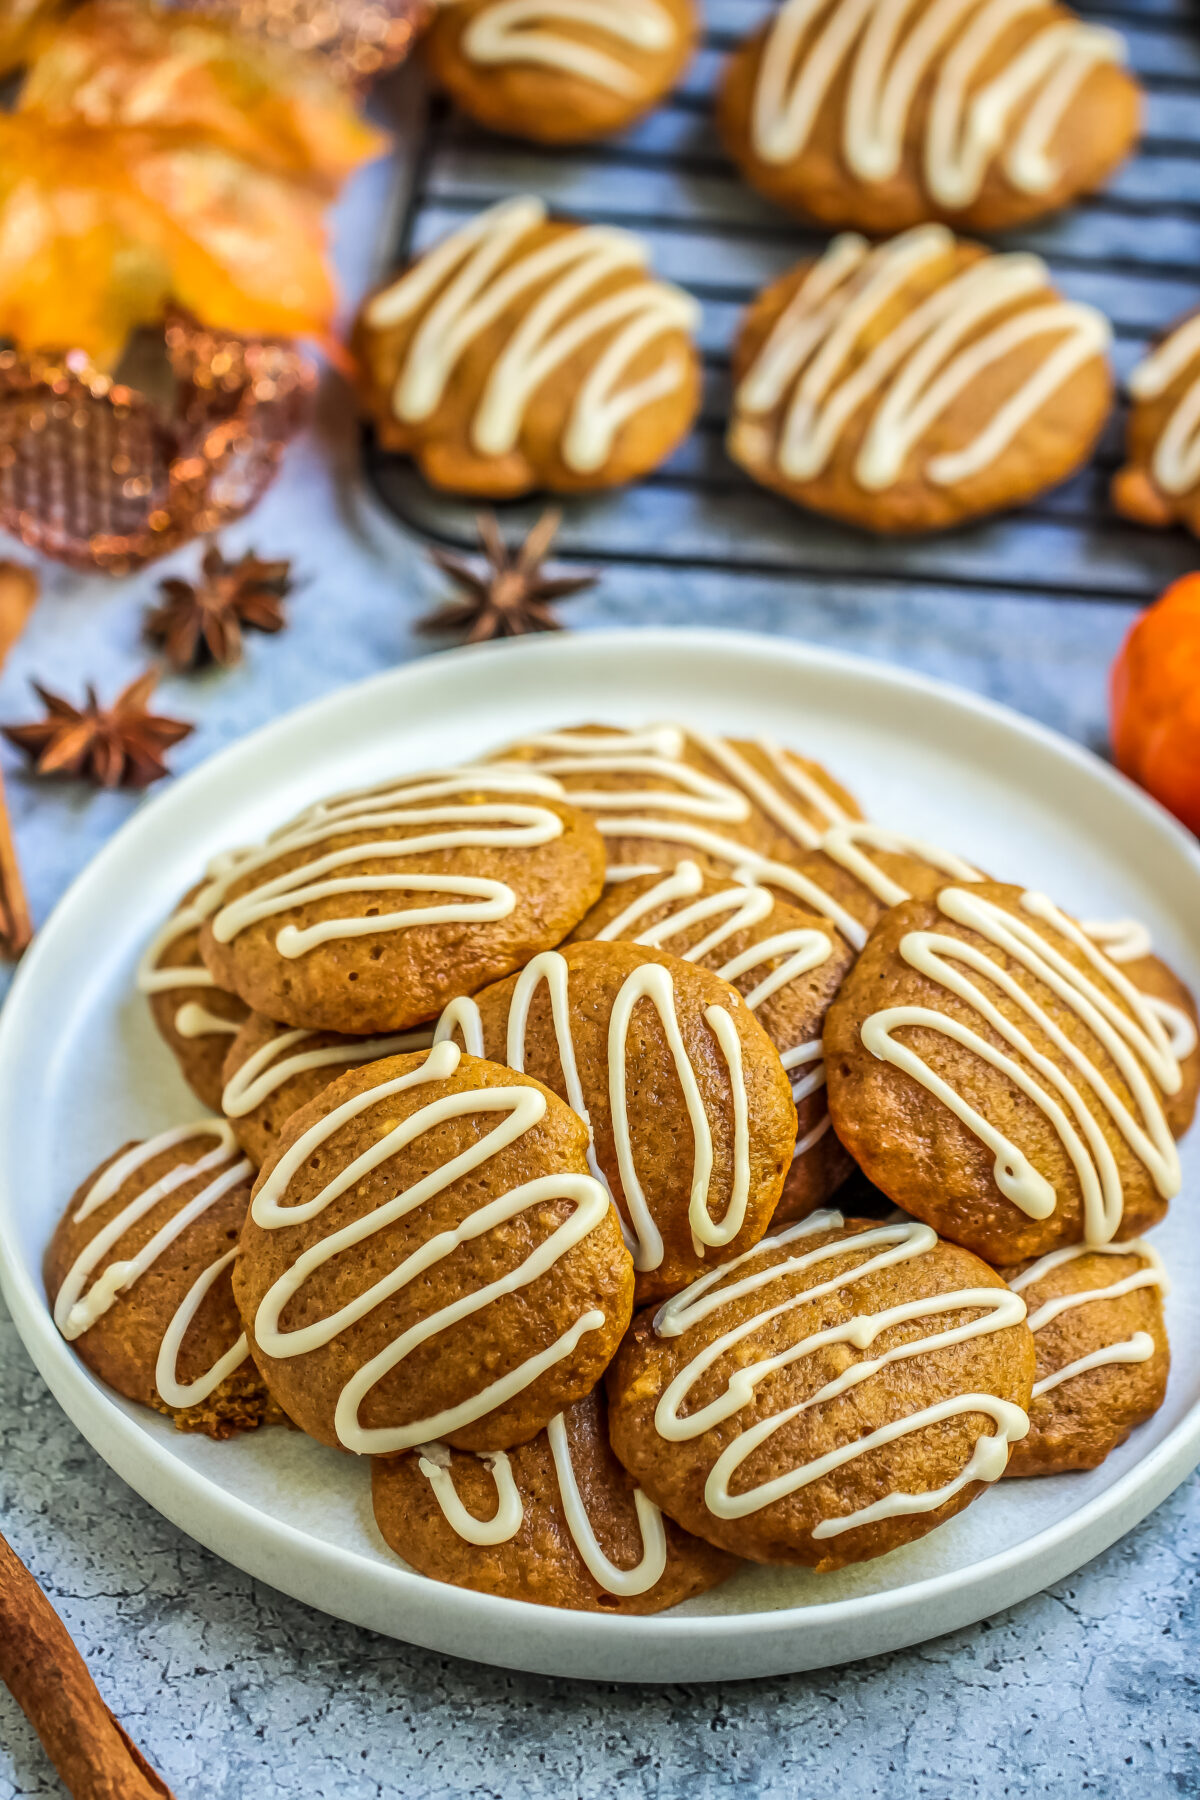 These soft and cakey pumpkin spice cookies with maple icing offer just the right amount of sweetness and a delicious kick of pumpkin spice.